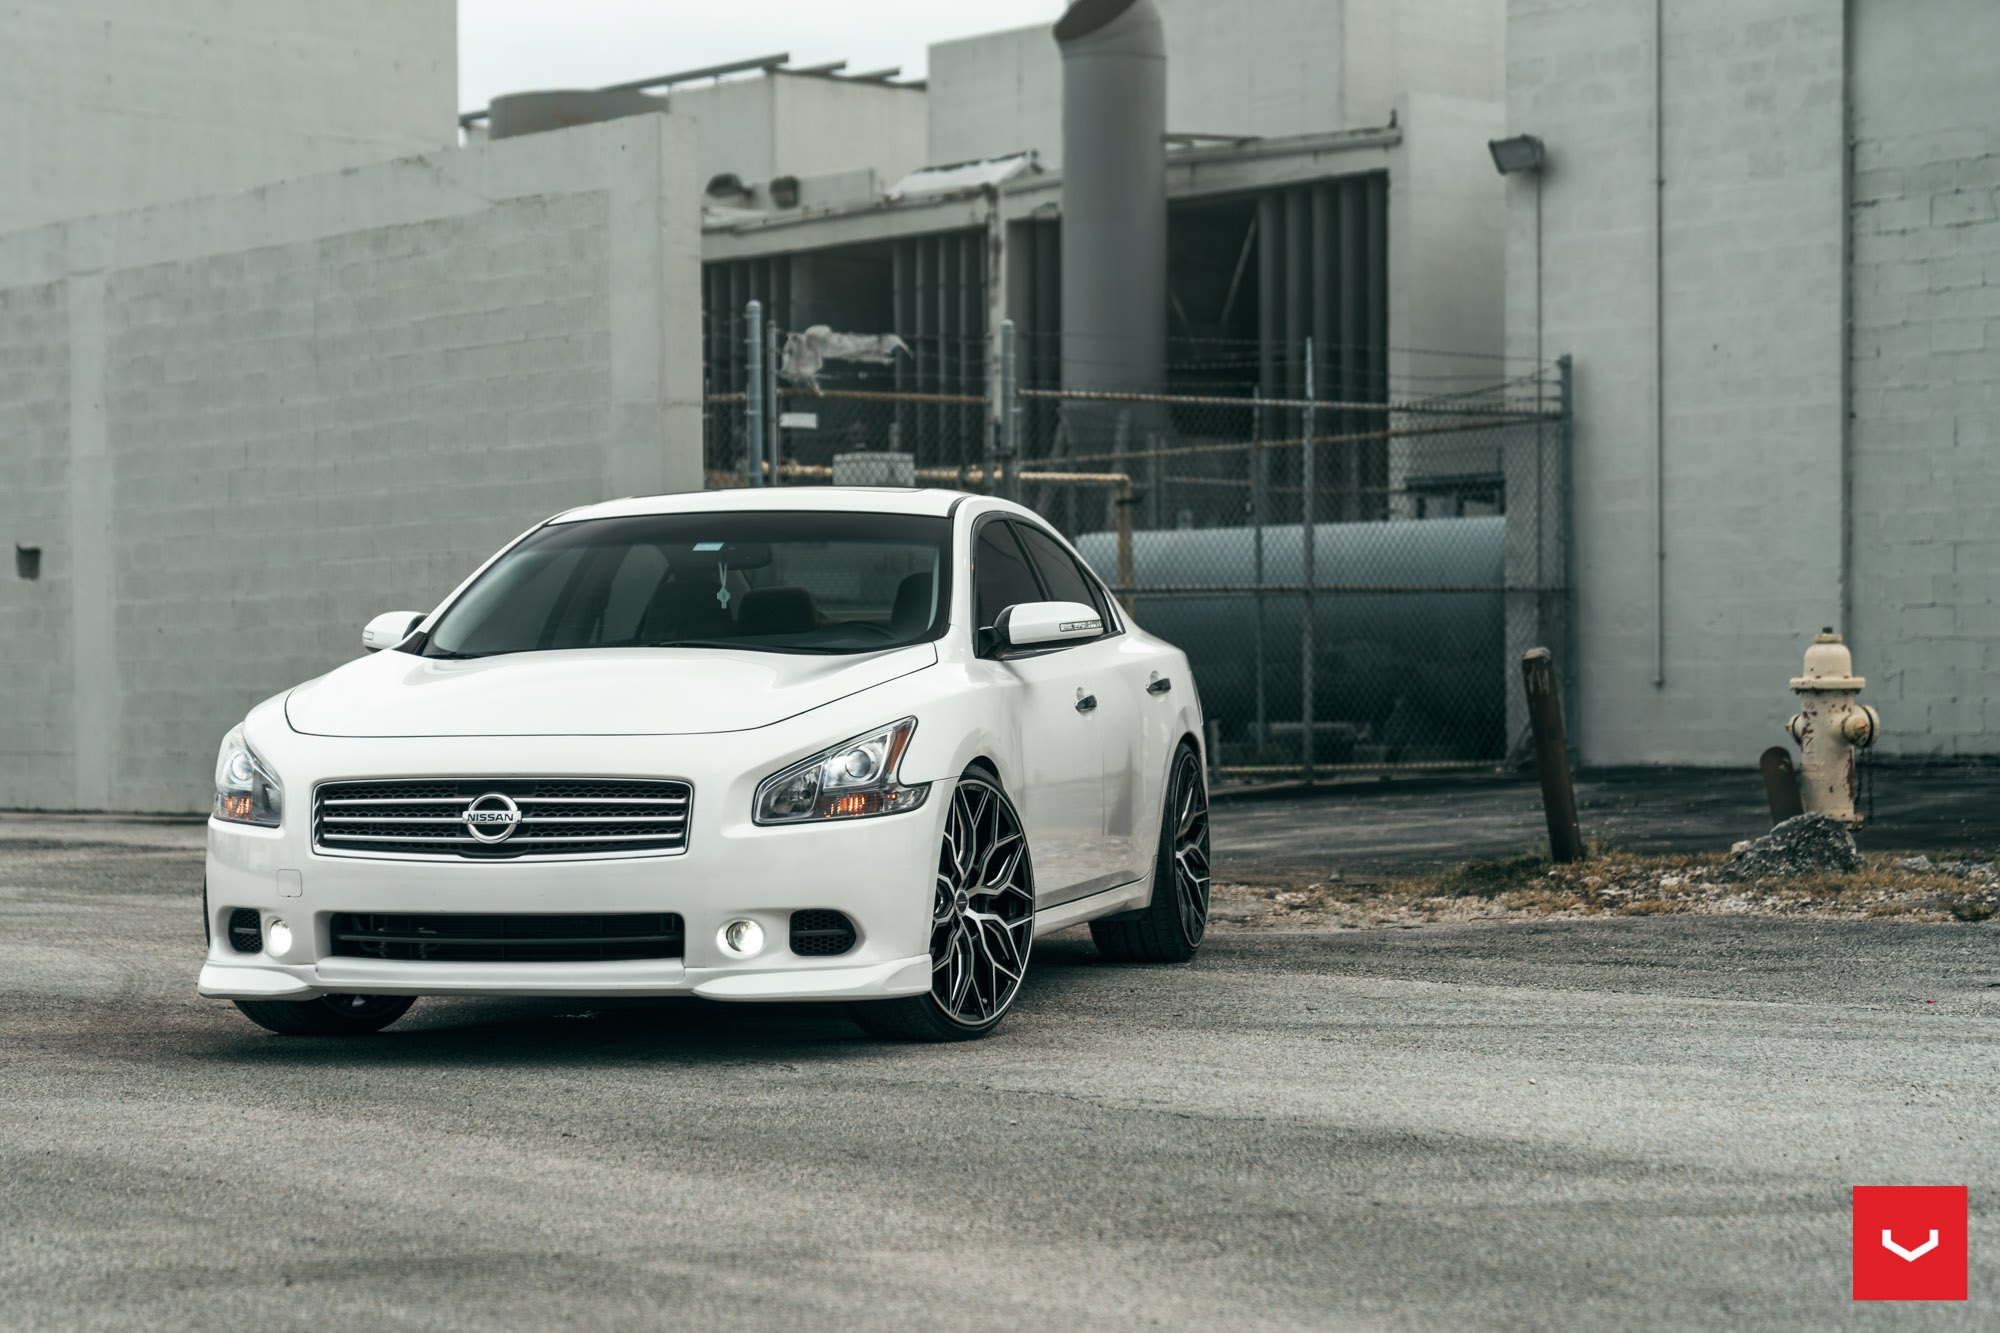 White Nissan Maxima with Custom Chrome Grille - Photo by Vossen